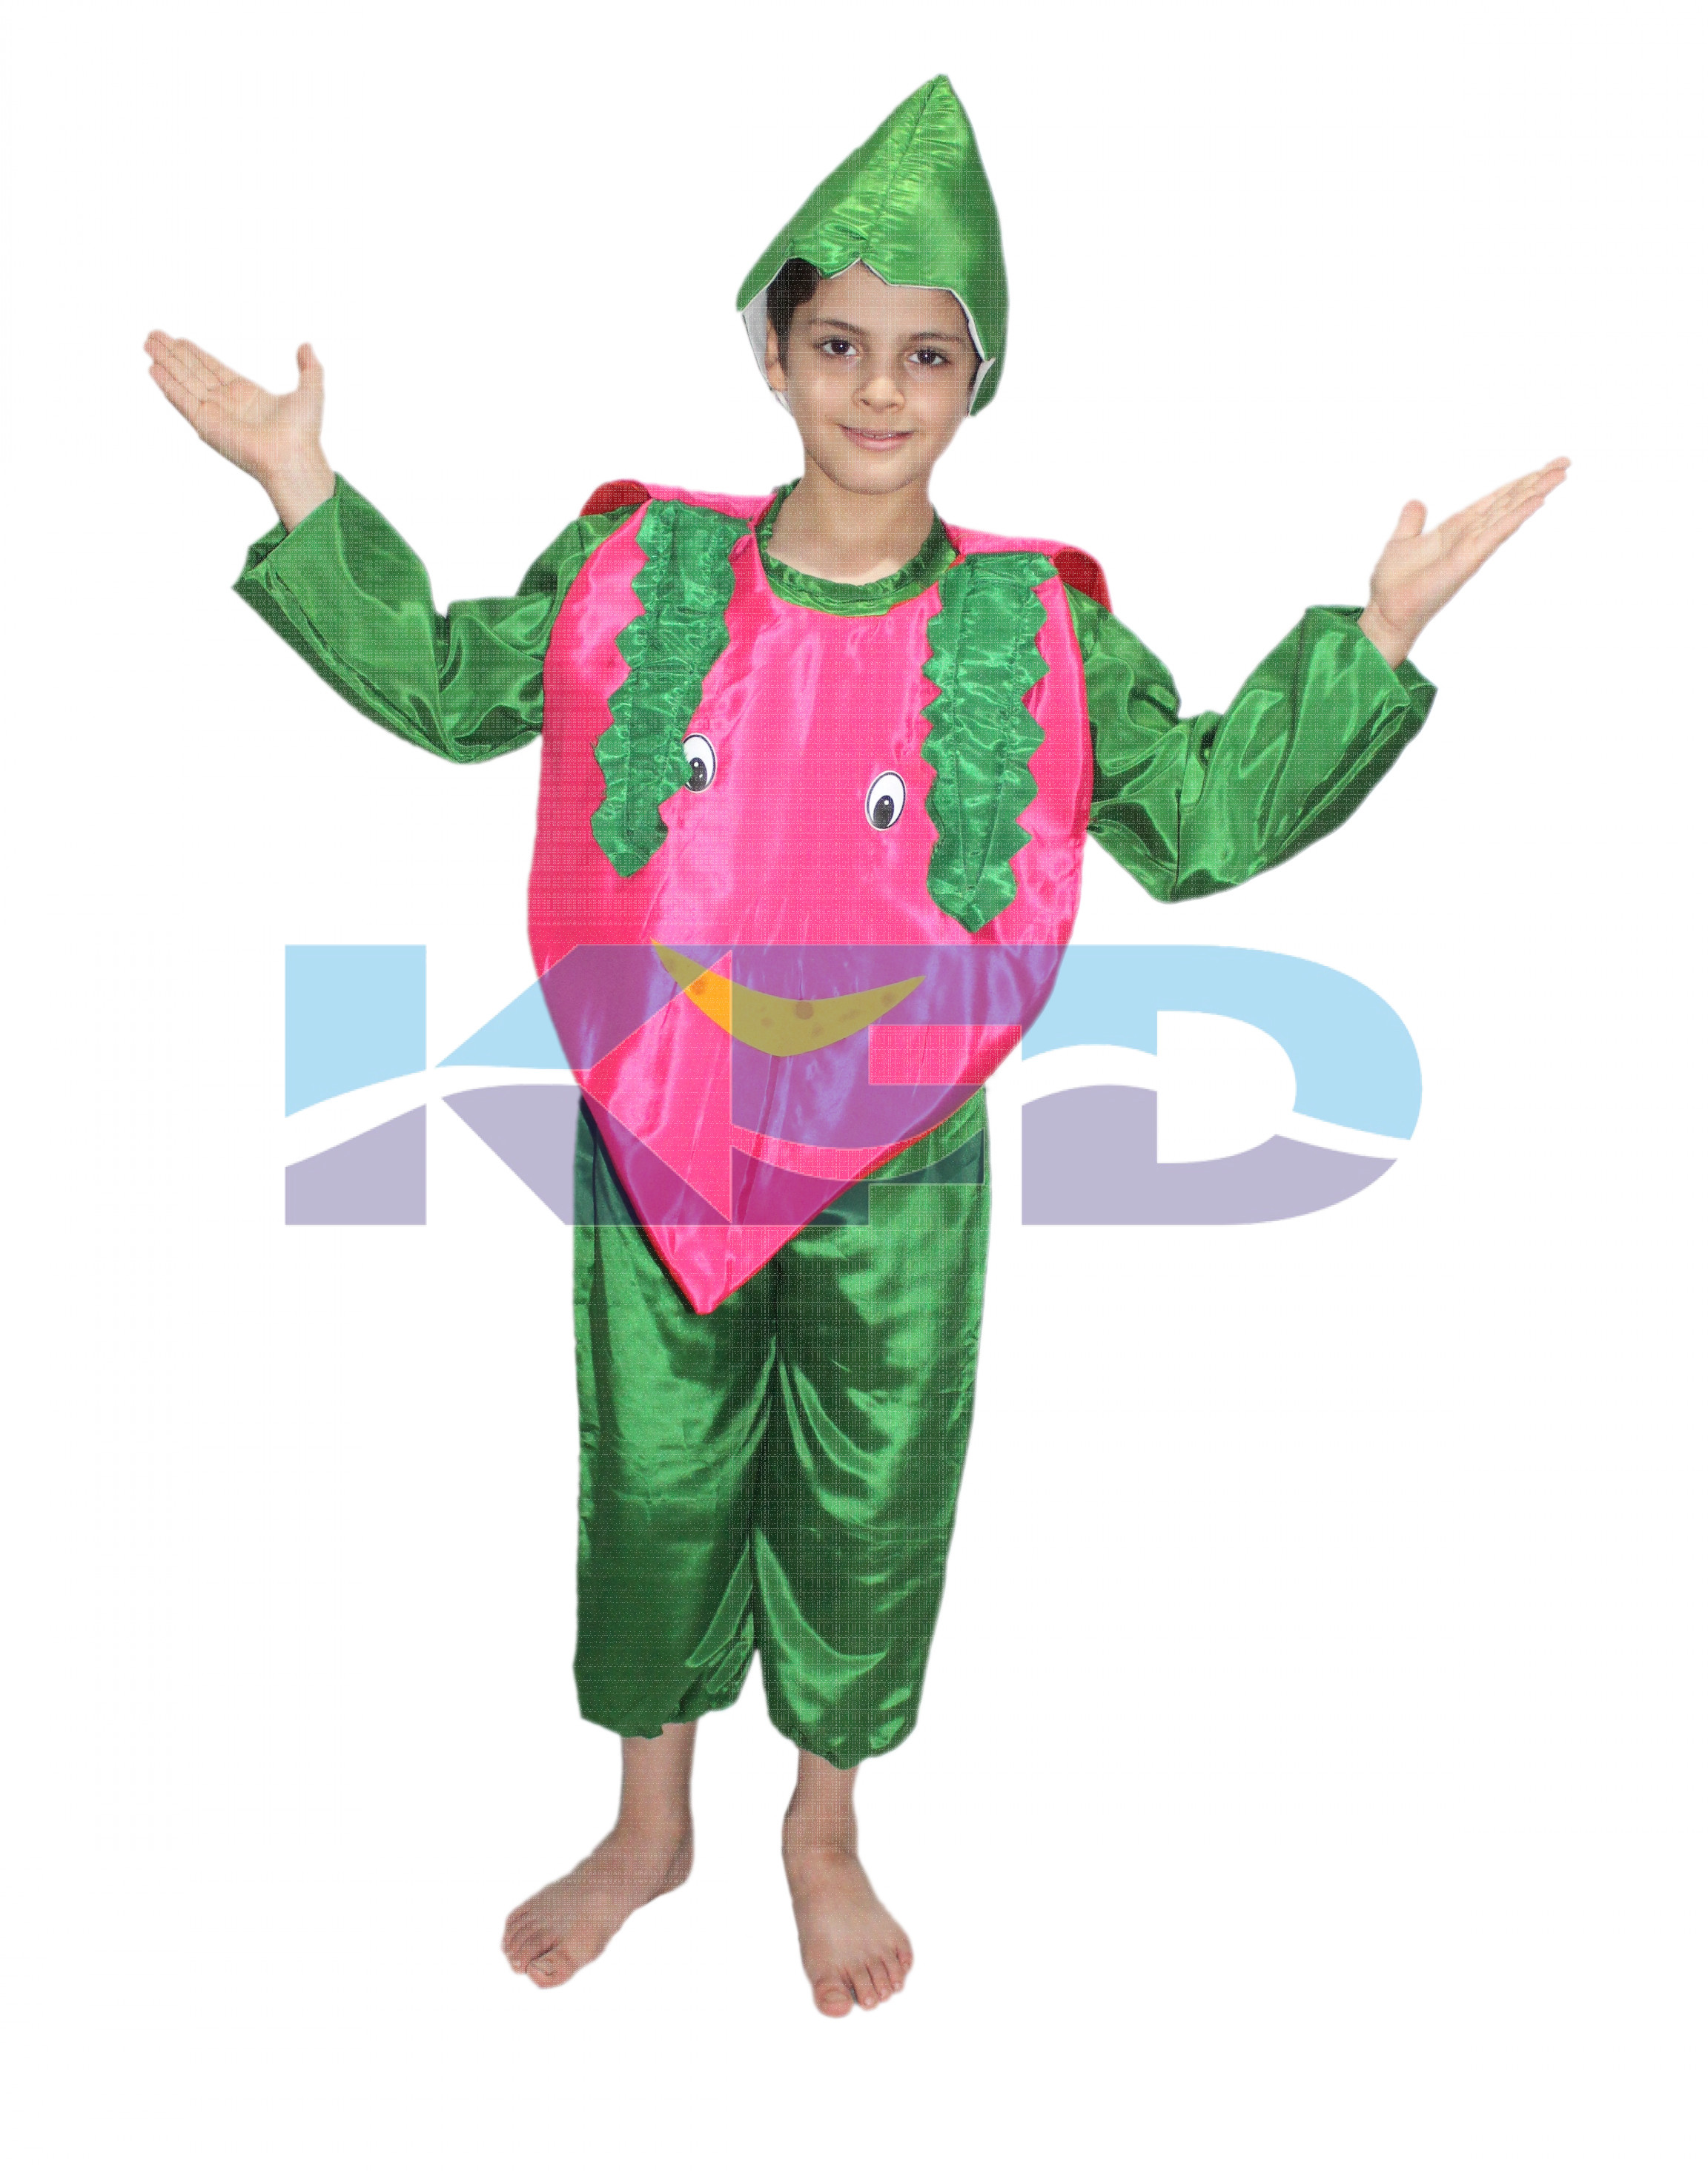 Onion fancy dress for kids,Vegetables Costume for School Annual function/Theme Party/Competition/Stage Shows Dress